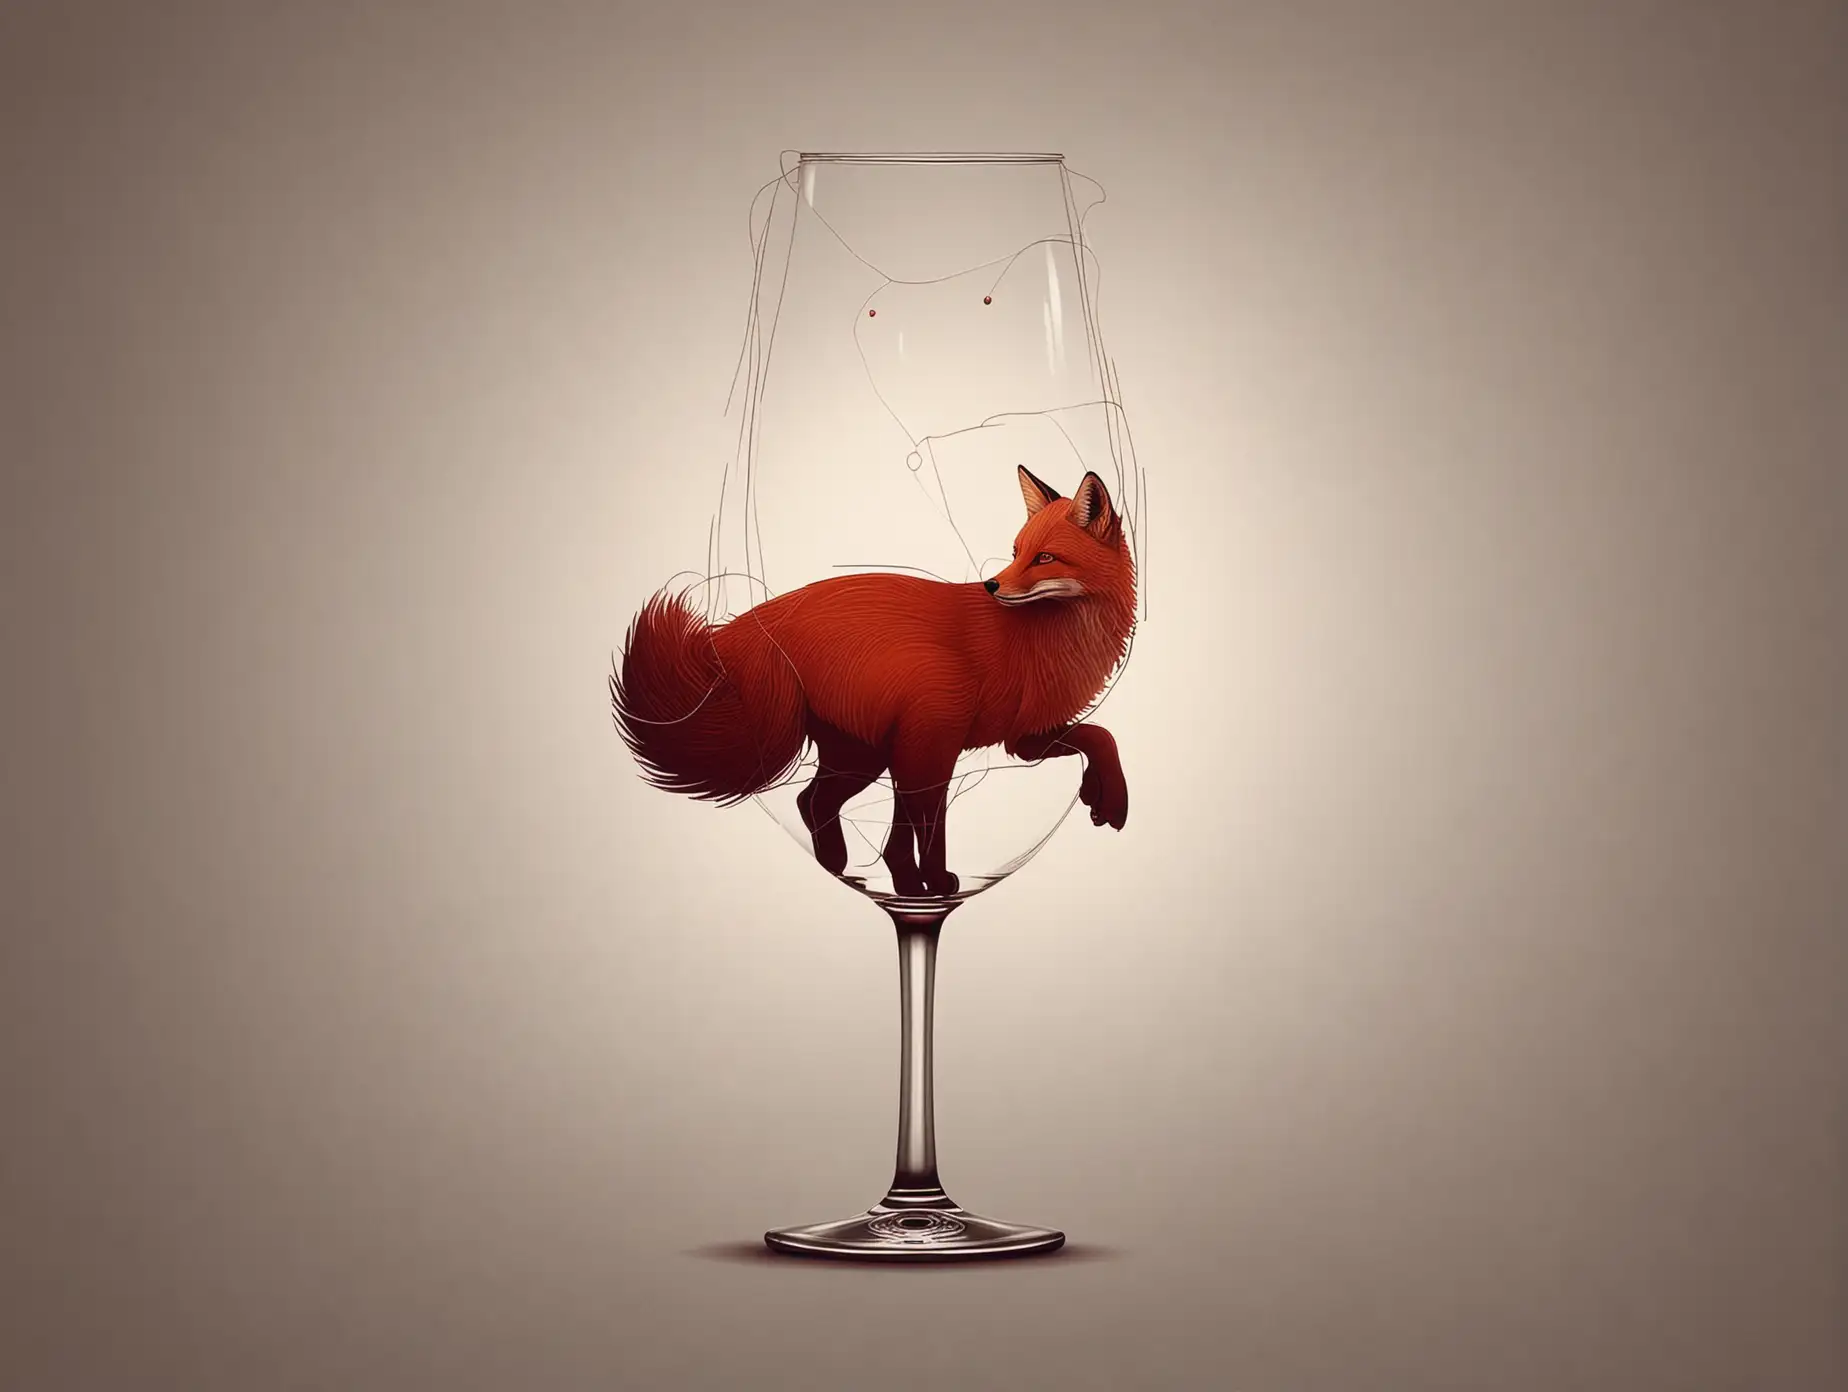 Elegant Fox Silhouette with Red Wine Glass Art